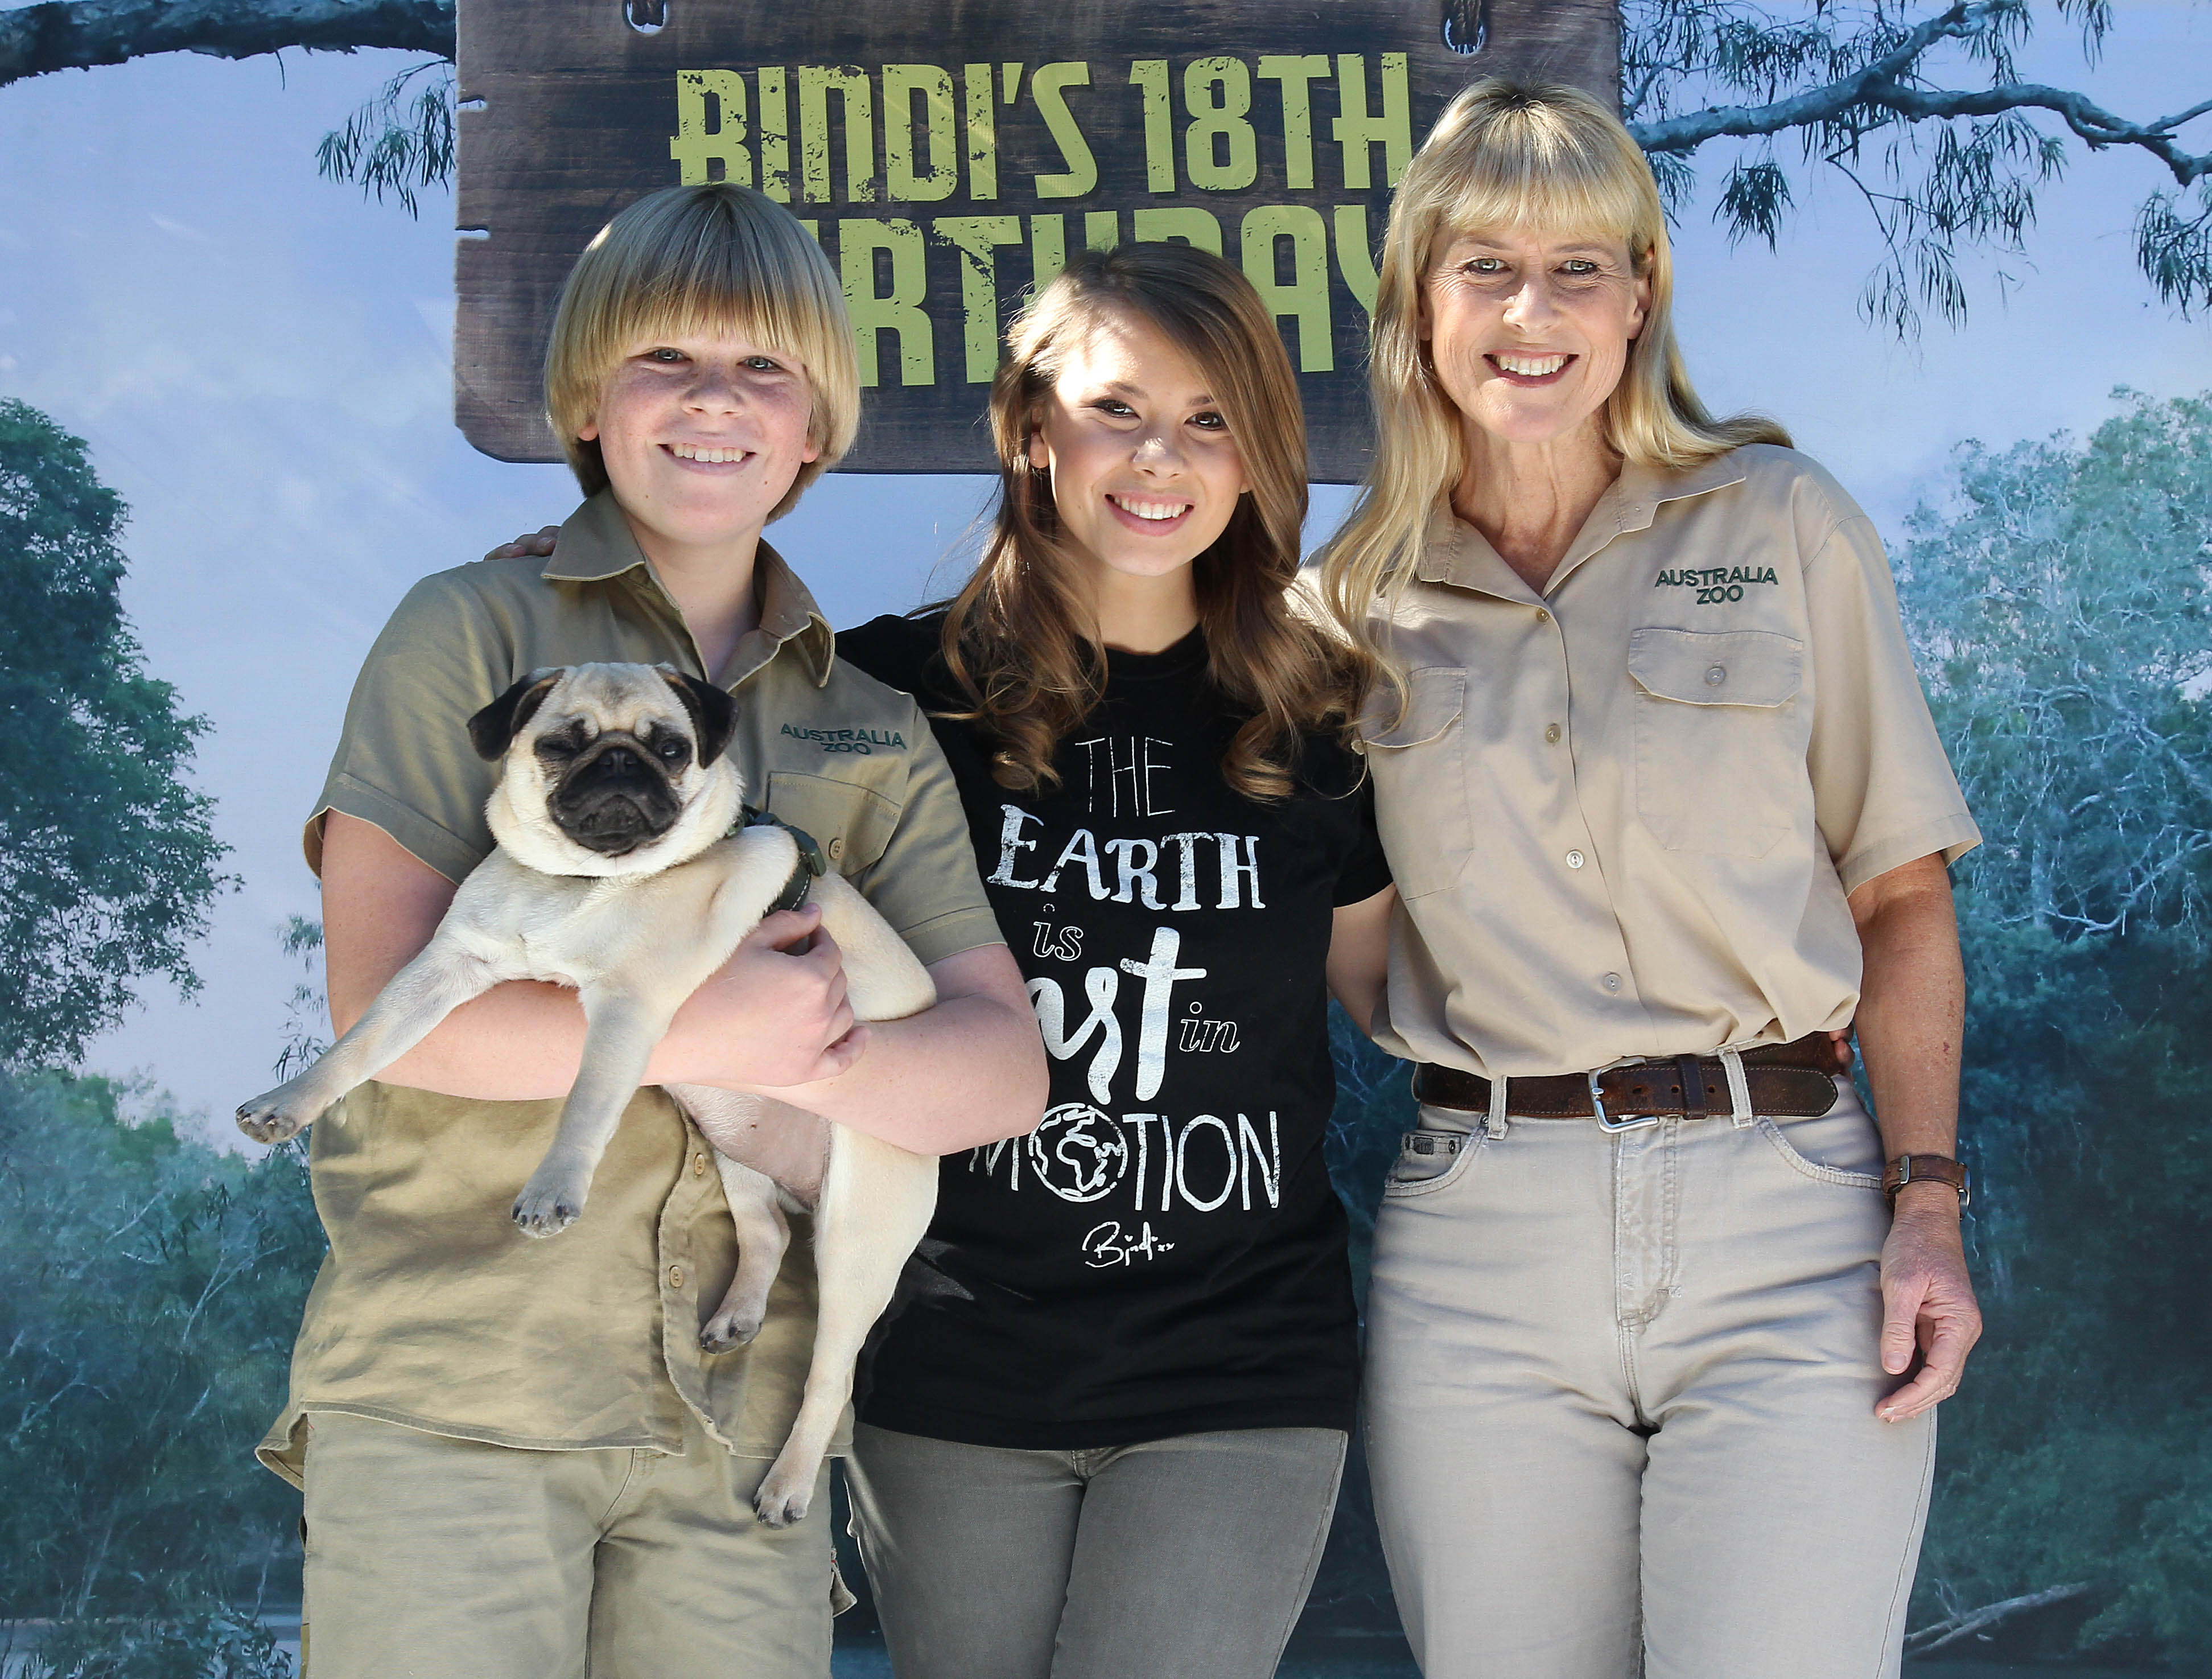 Bindi Irwin pictured at Australia Zoo for her 18th Birthday celebrations along with her mother Terri Irwin, brother Robert  July 24, 2016| Photo: Getty Images